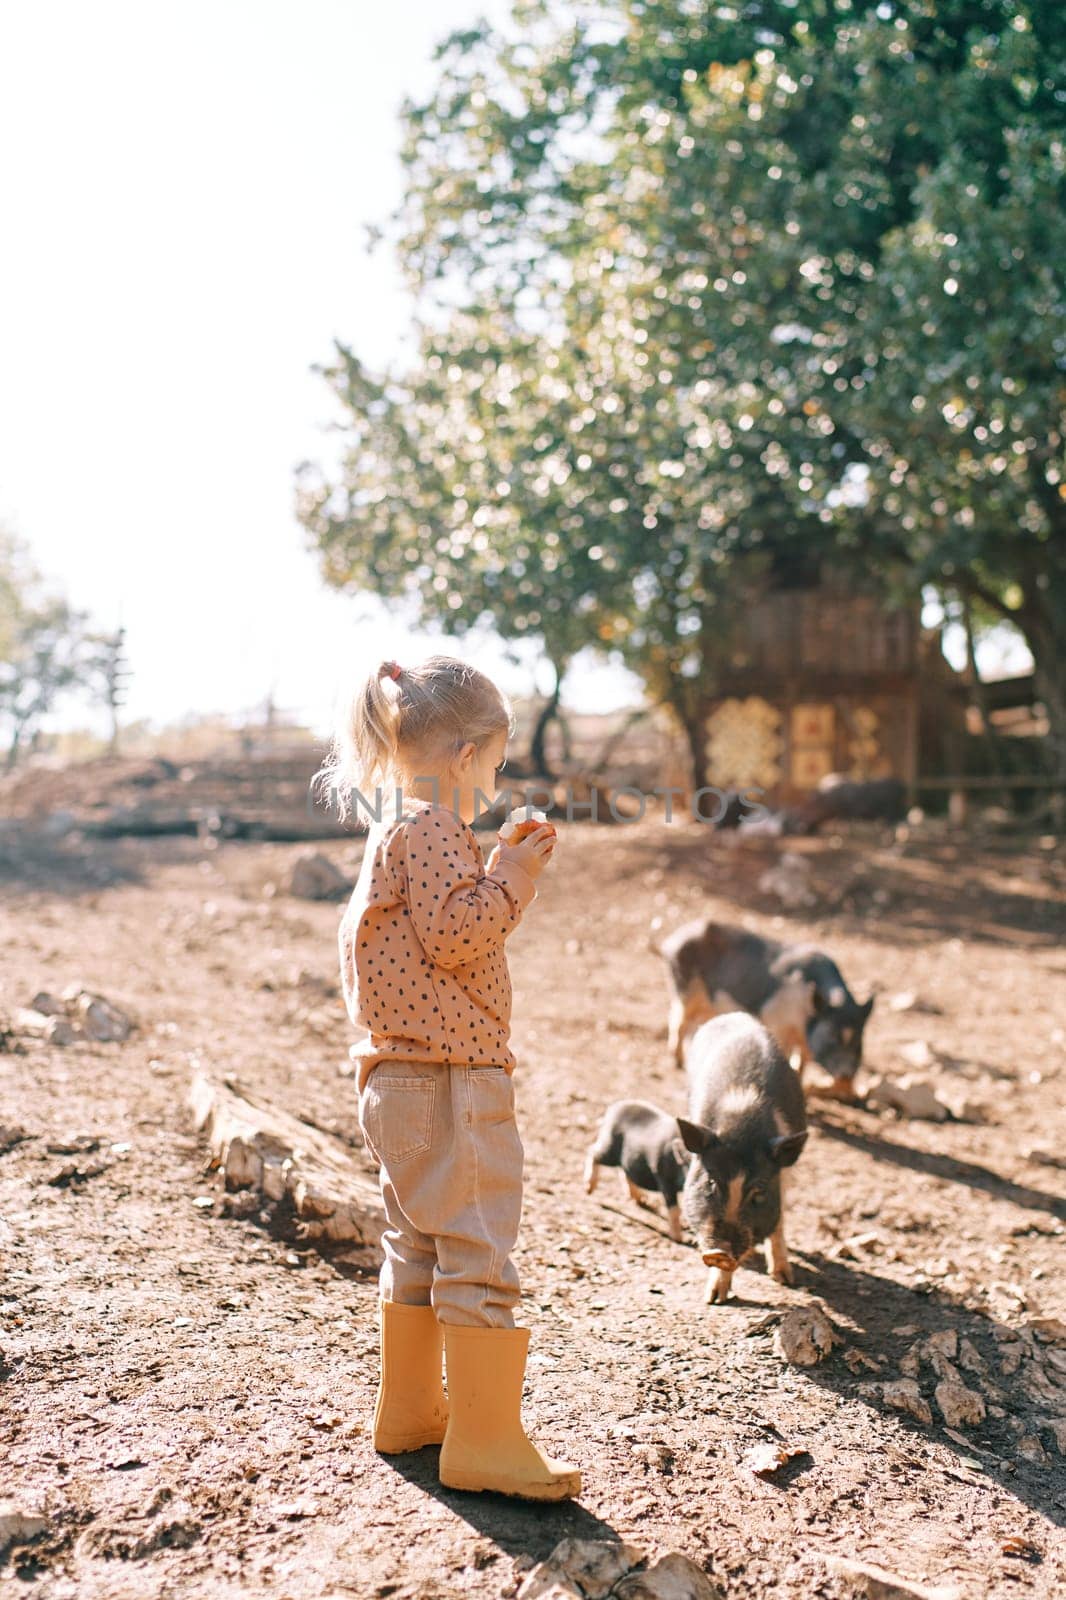 Little girl with an apple in her hand stands near fluffy small pigs grazing in the park by Nadtochiy